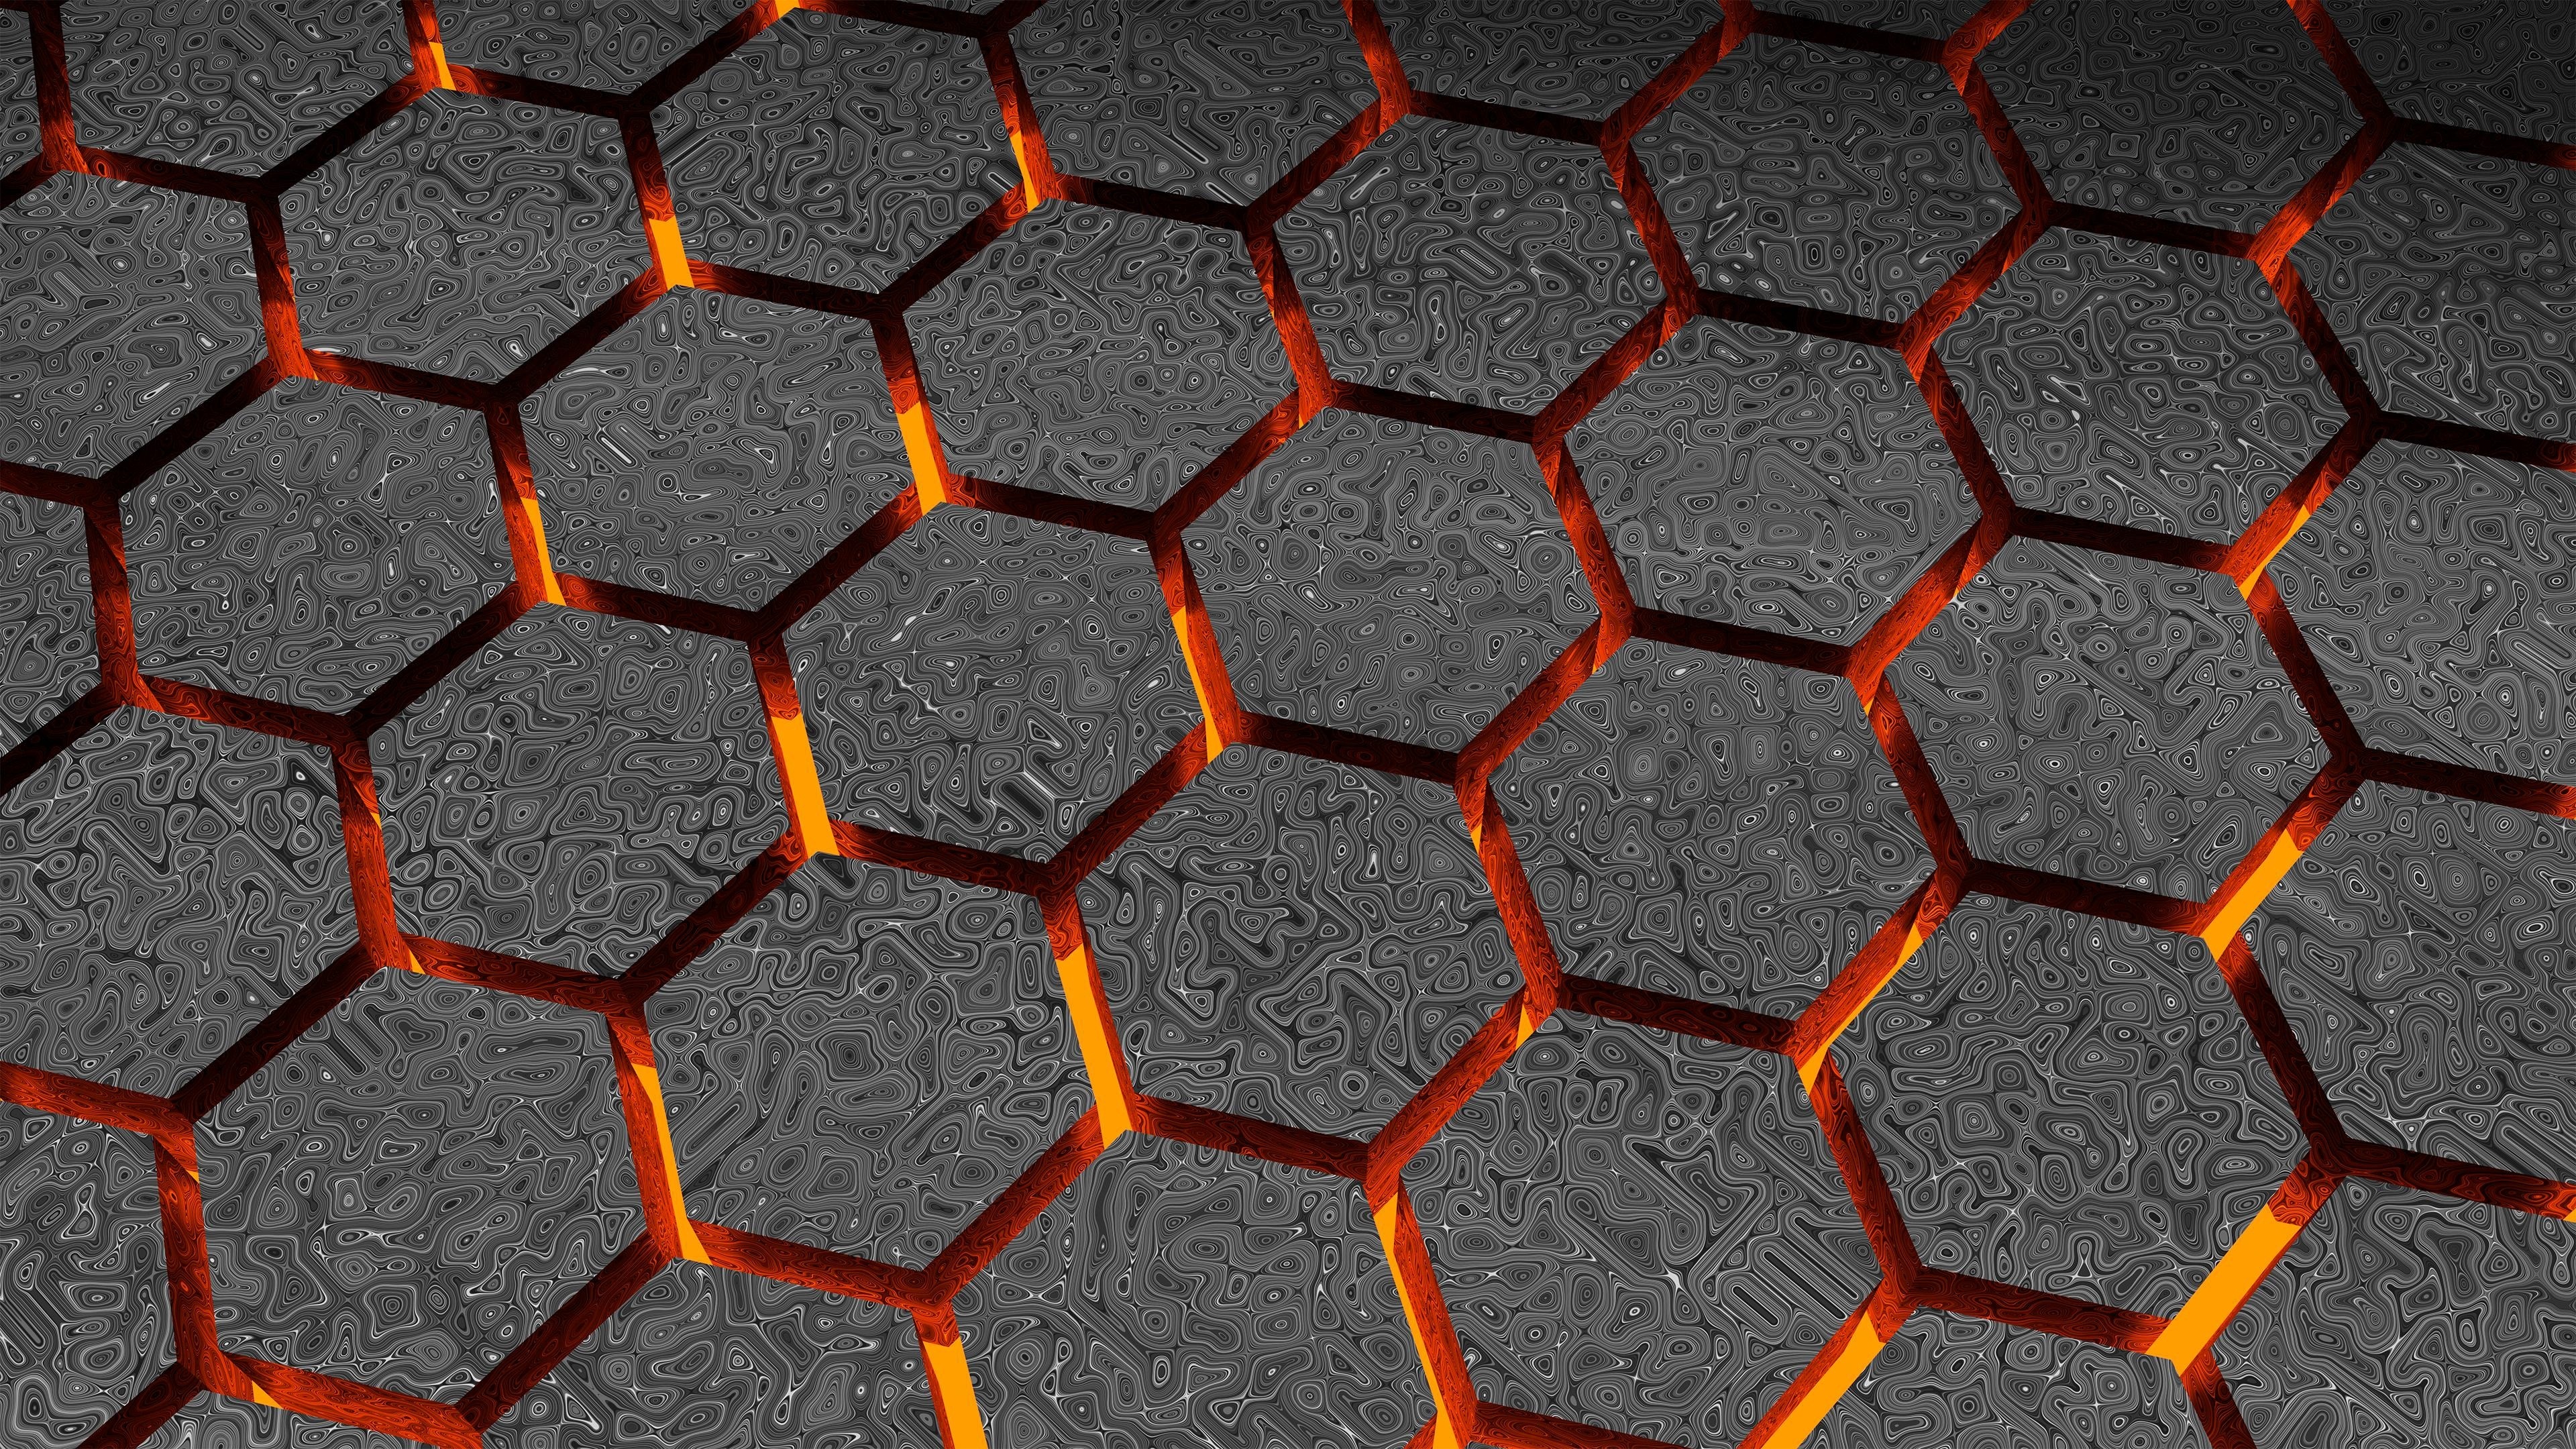 Download 3840x2160 Wallpaper Pattern Abstract Glowing Hexagons 4k 4